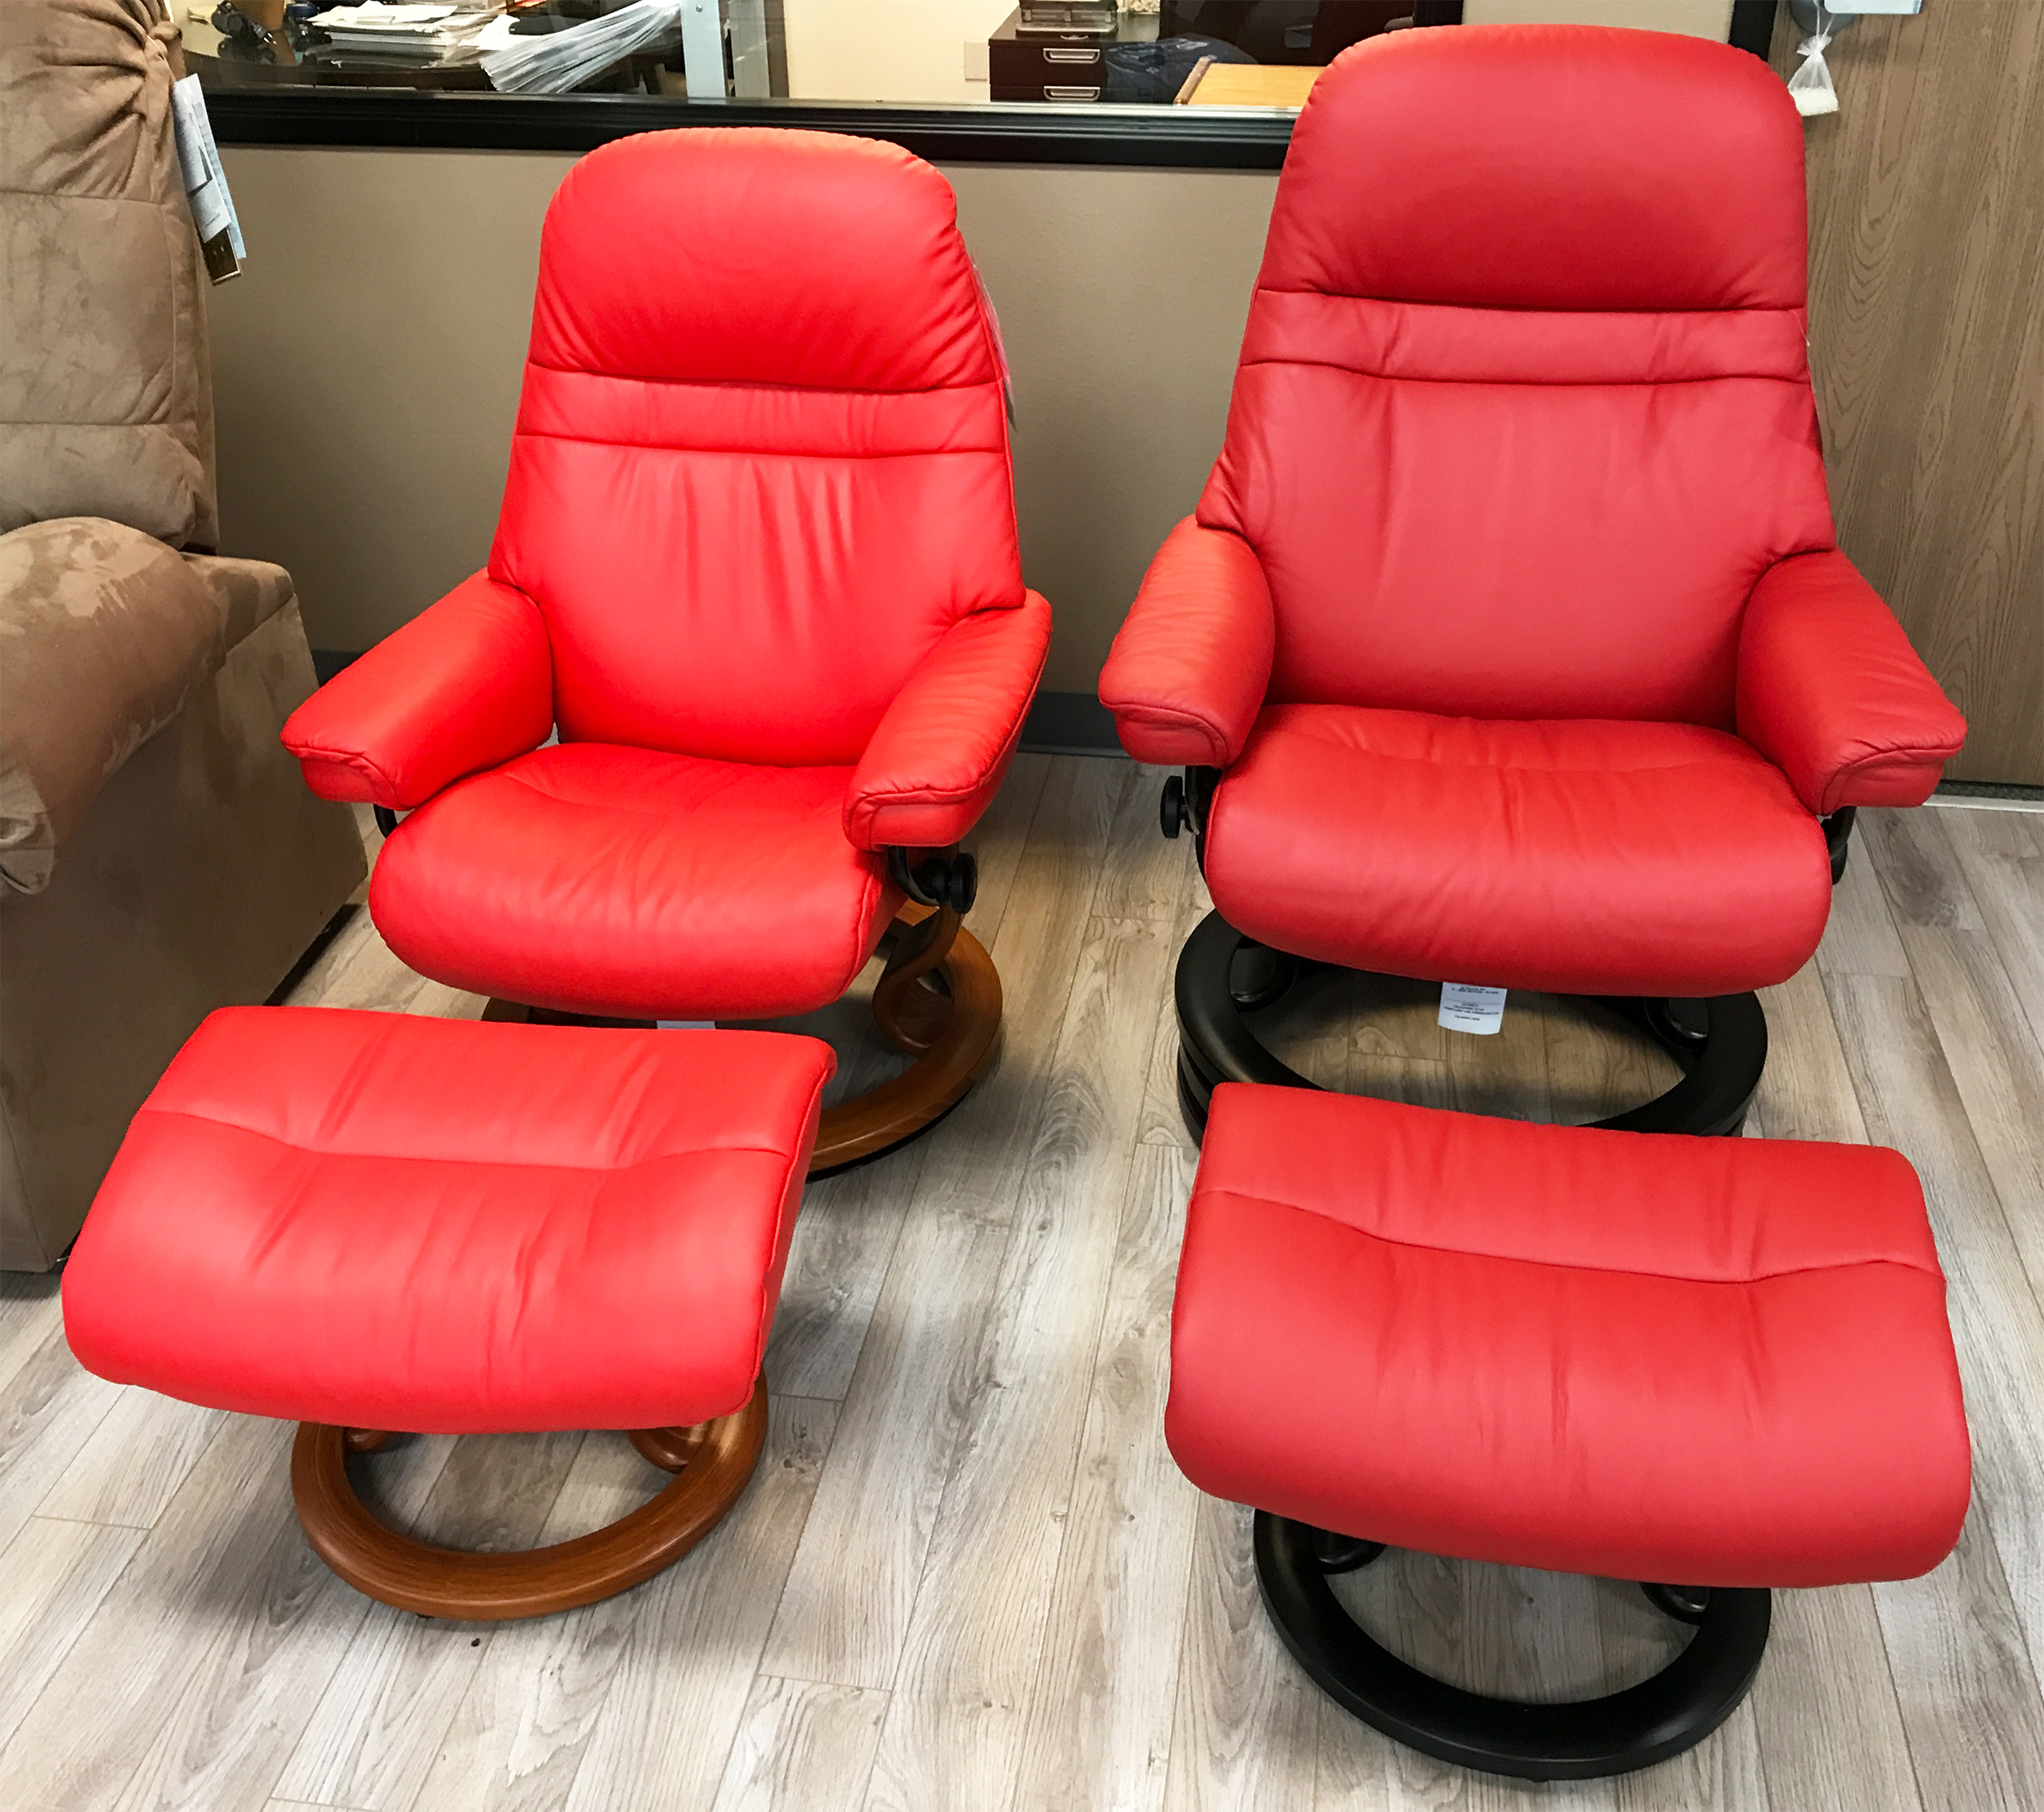 Stressless Paloma Tomato 09461 Leather, Red Leather Chairs With Ottomans